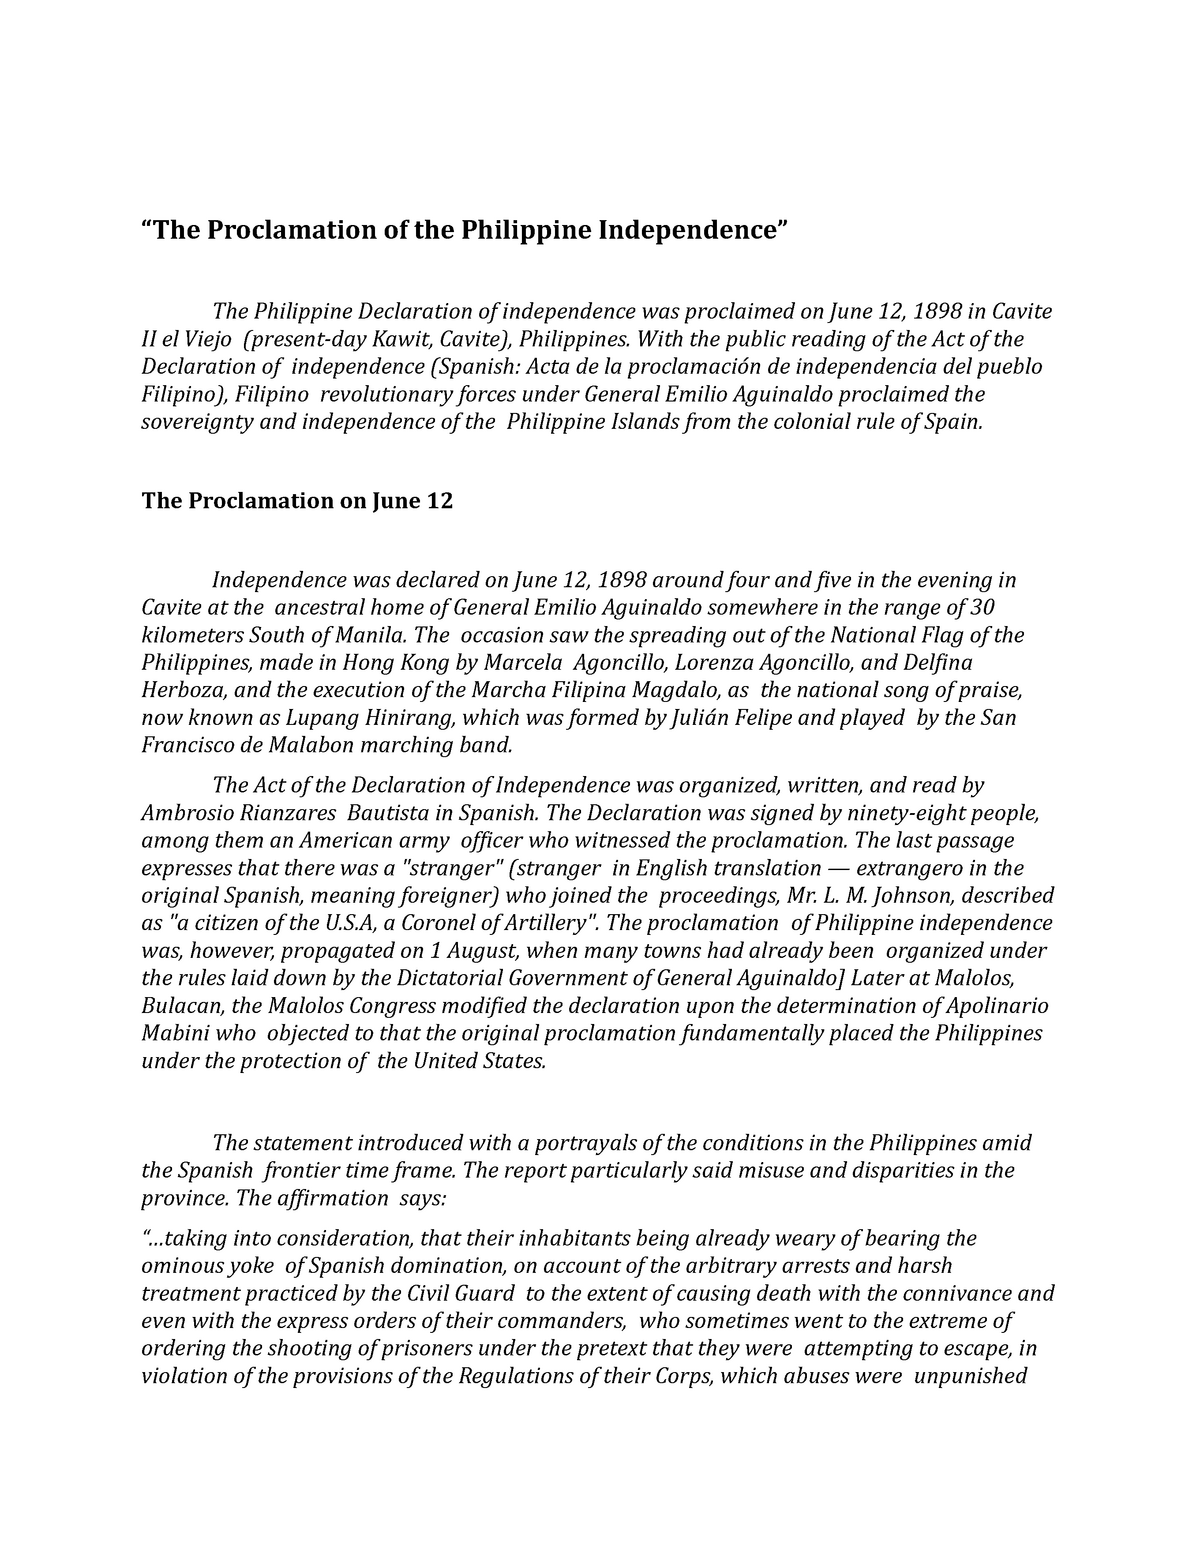 reflective essay on the proclamation of the philippine independence